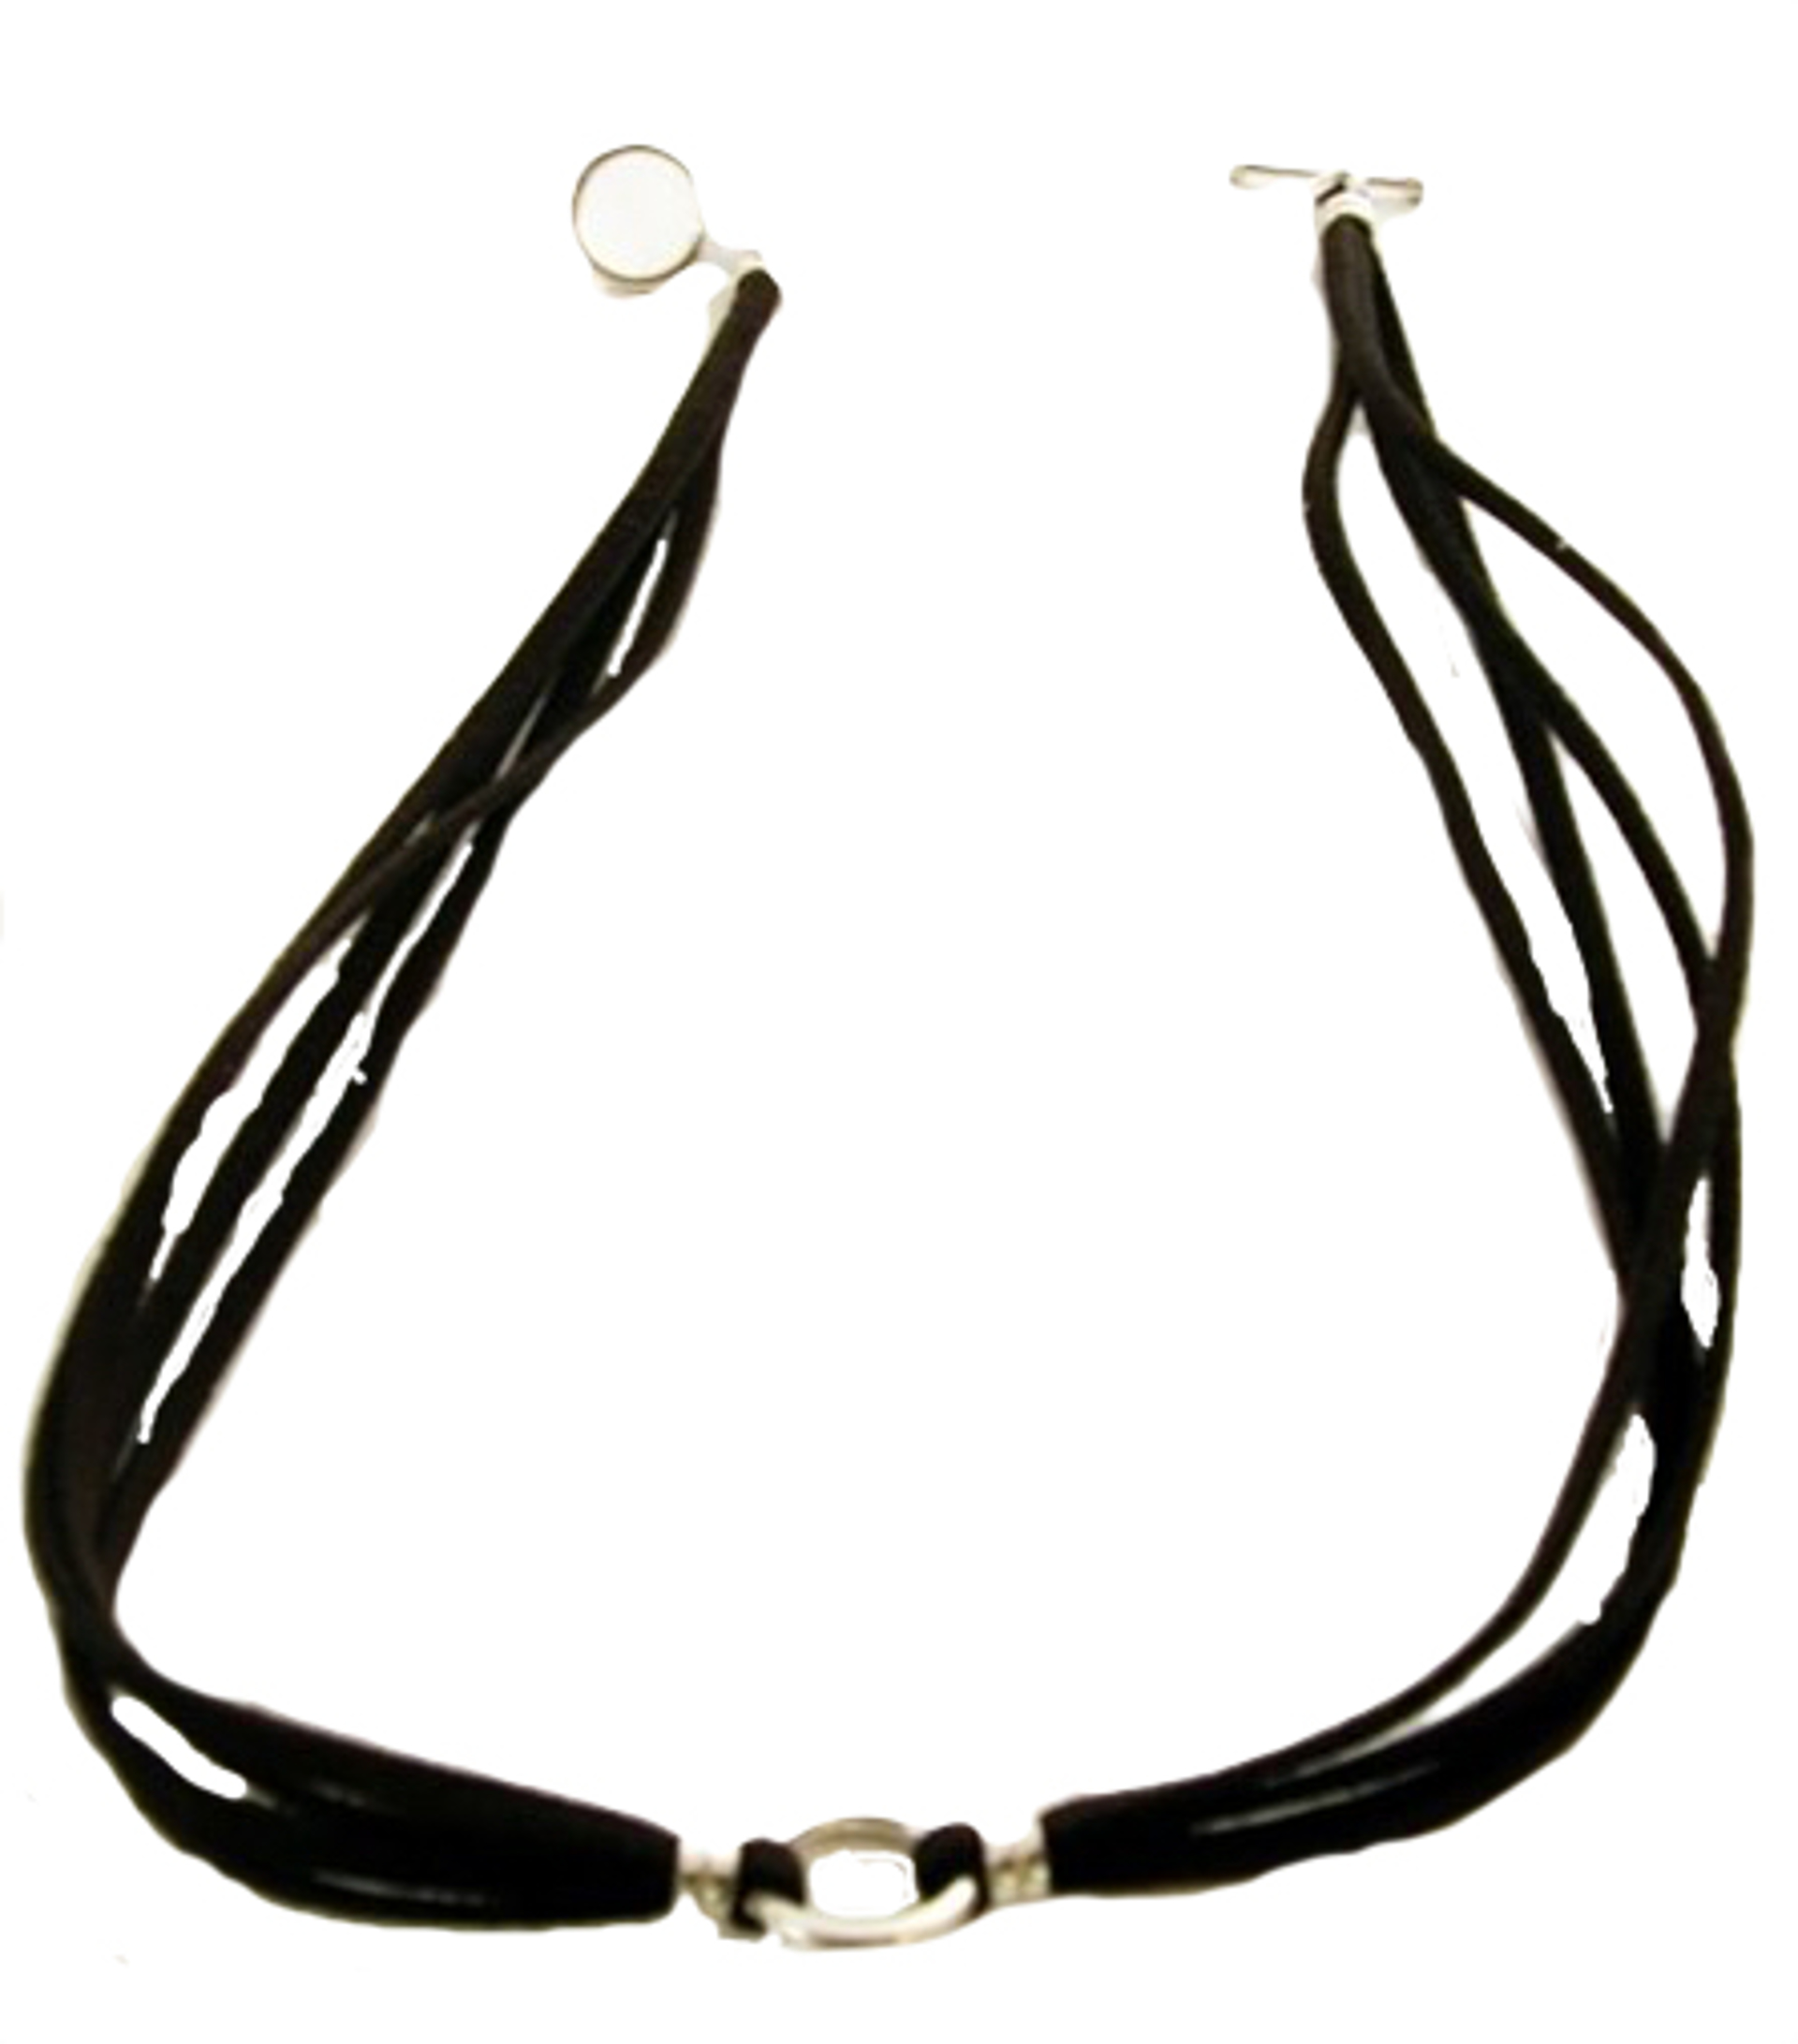 Necklace - 16" Brown Leather with Sterling Silver by Indigo Desert Ranch - Jewelry